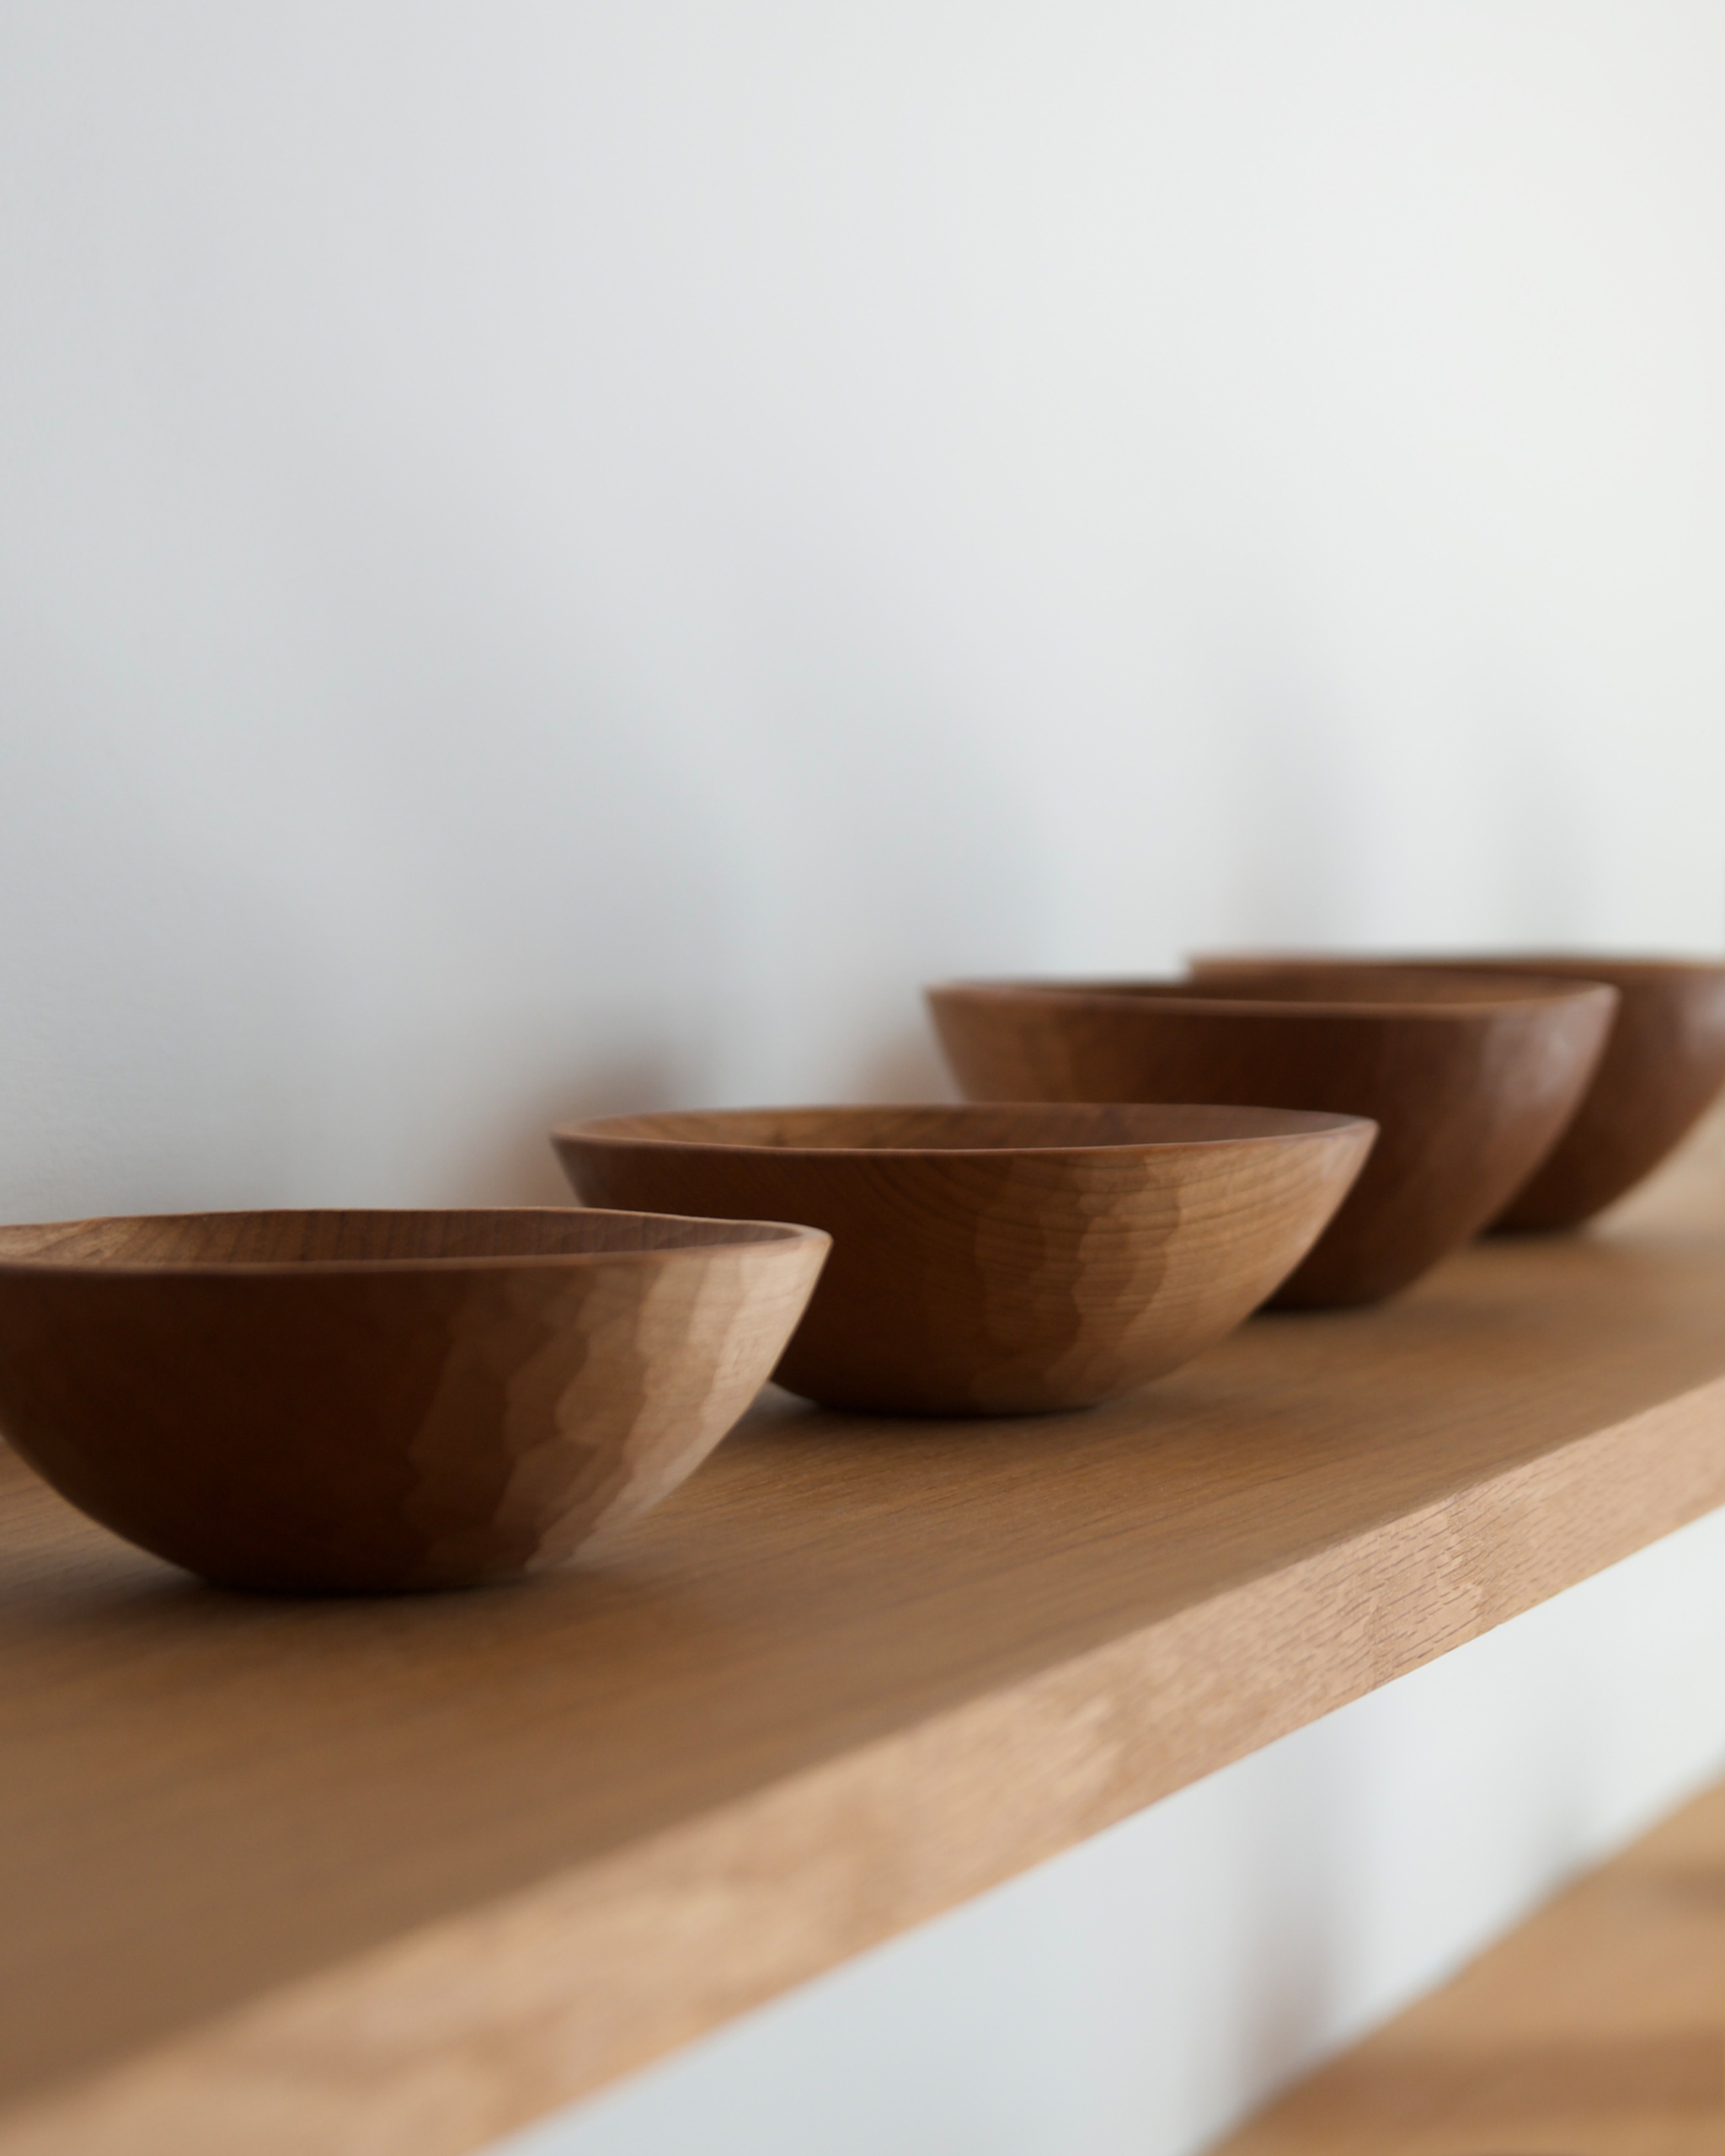 Carved cherry wooden bowls by Ryuji Mitani in a row